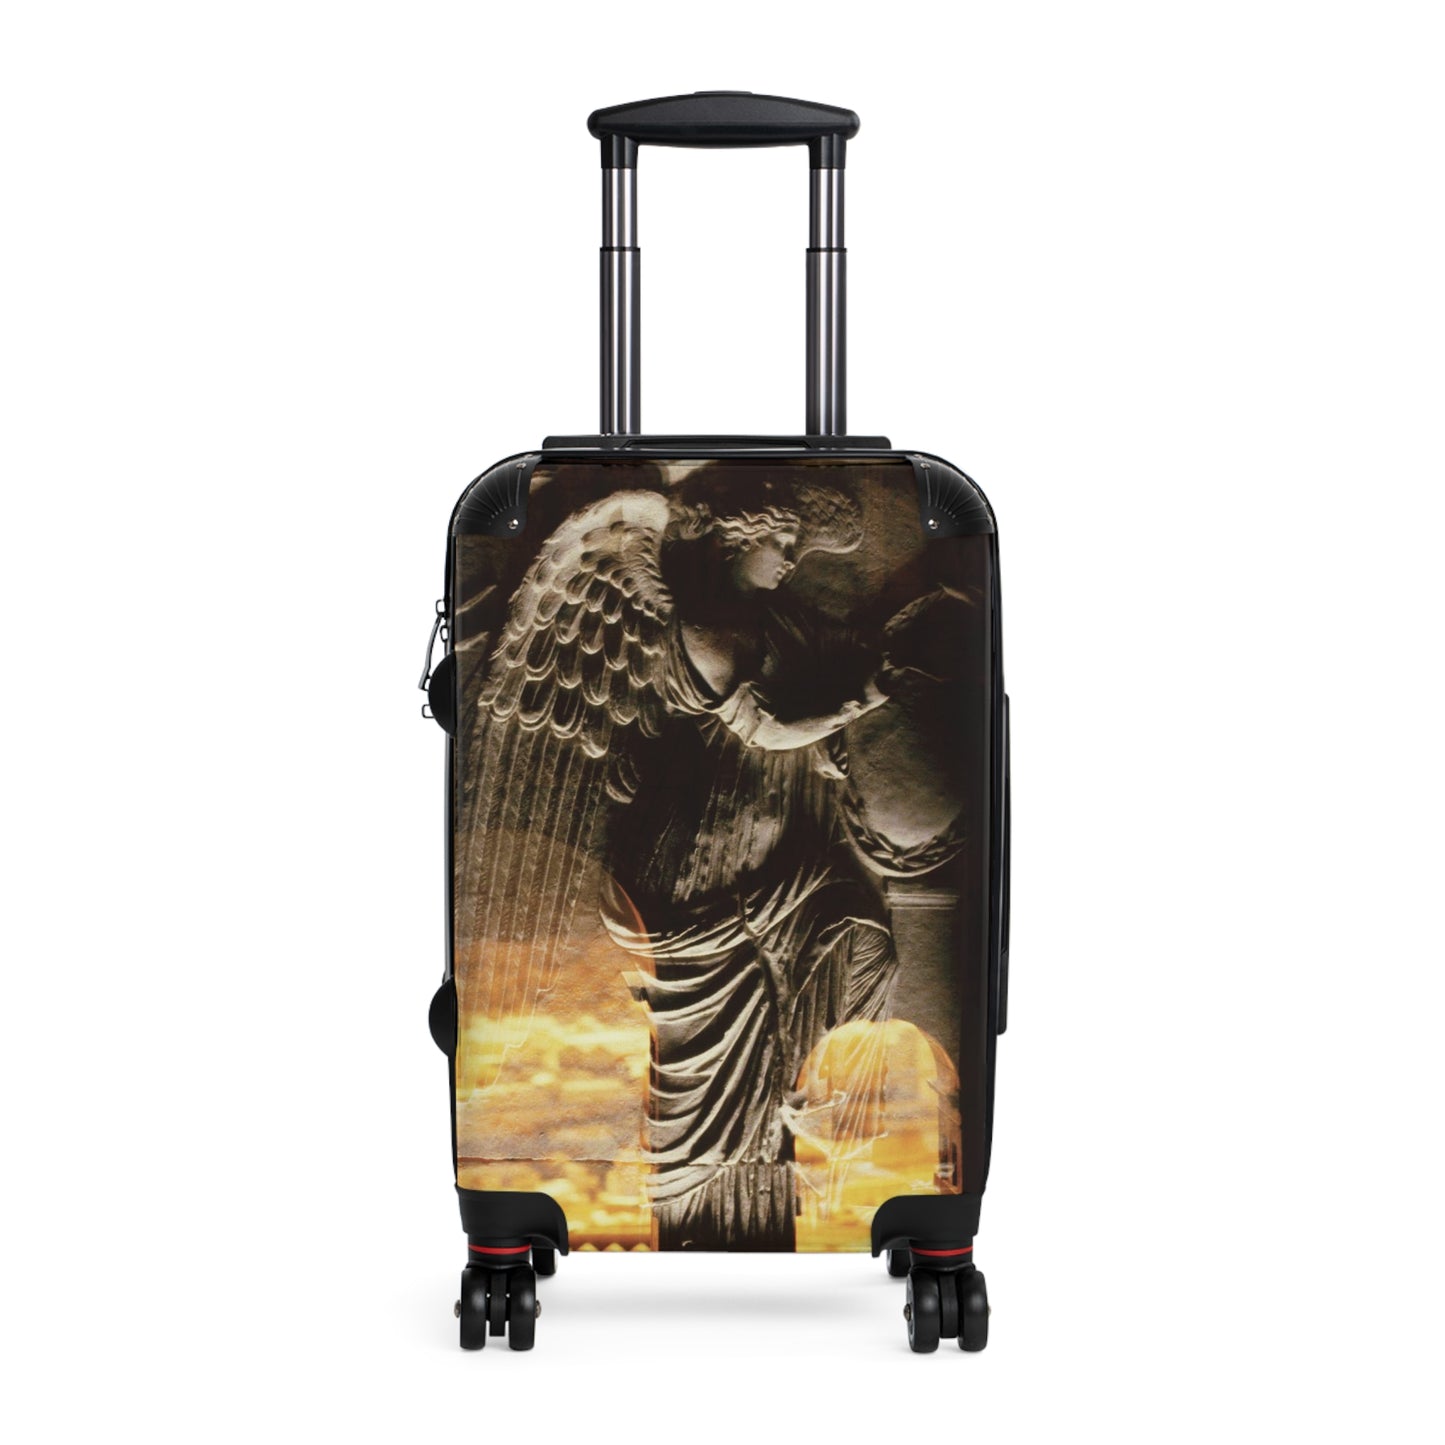 Arch Of Victory Luggage